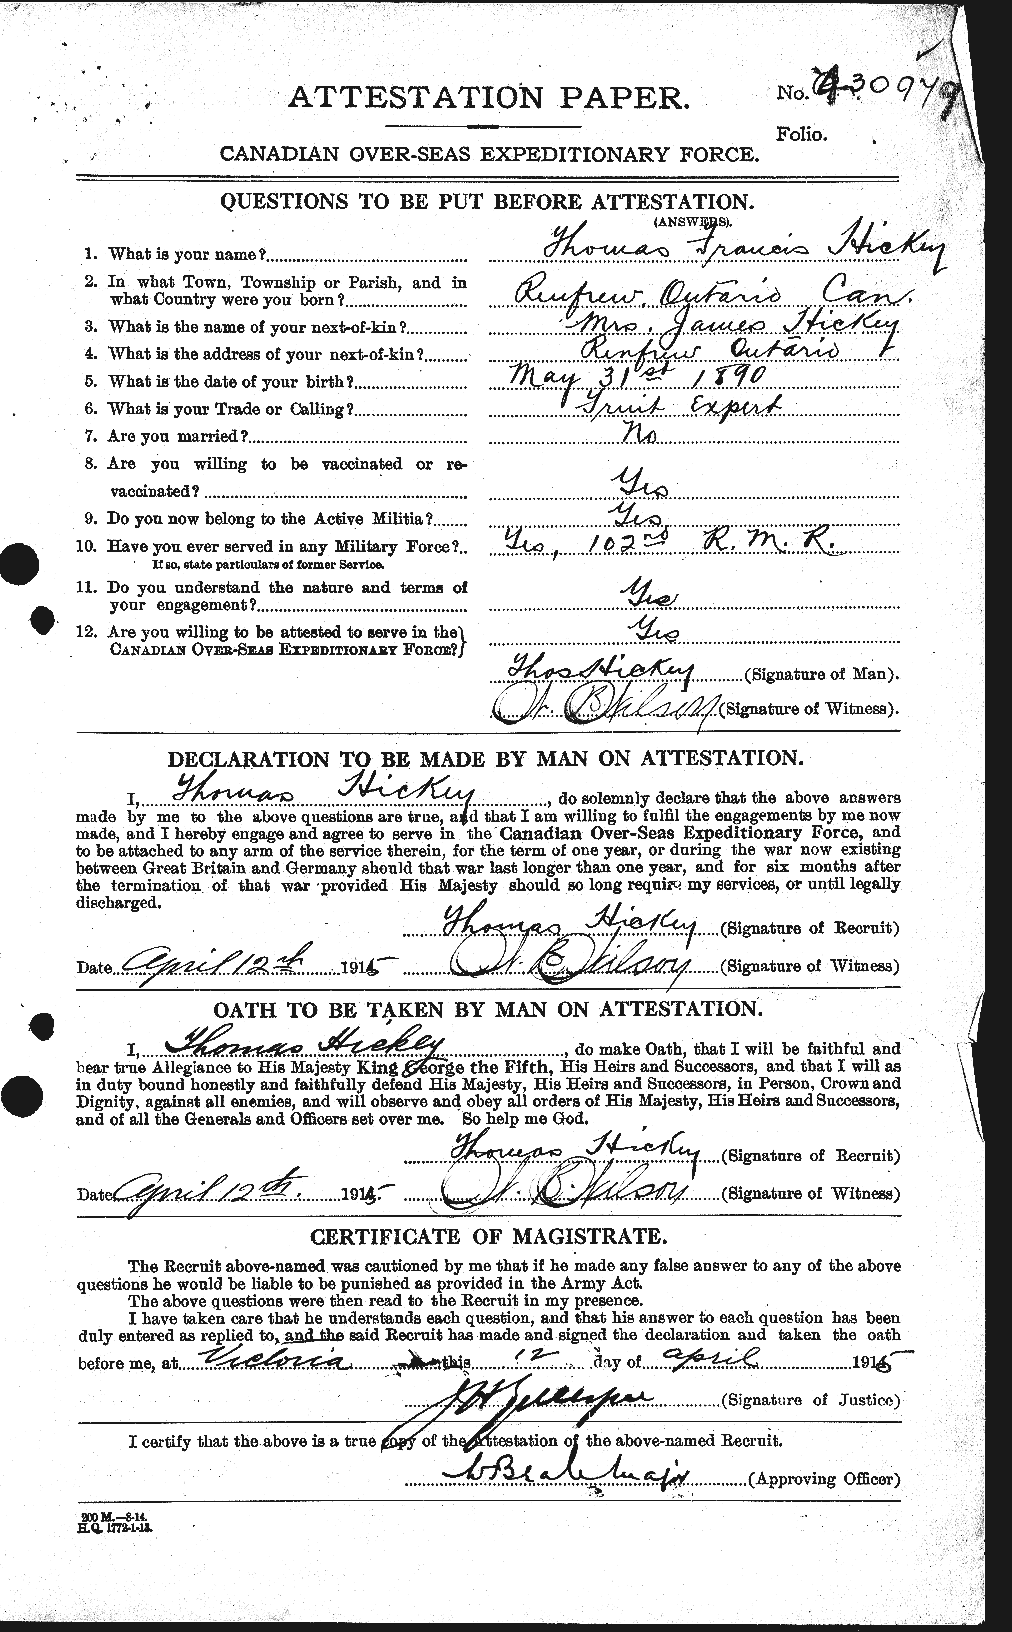 Personnel Records of the First World War - CEF 388926a